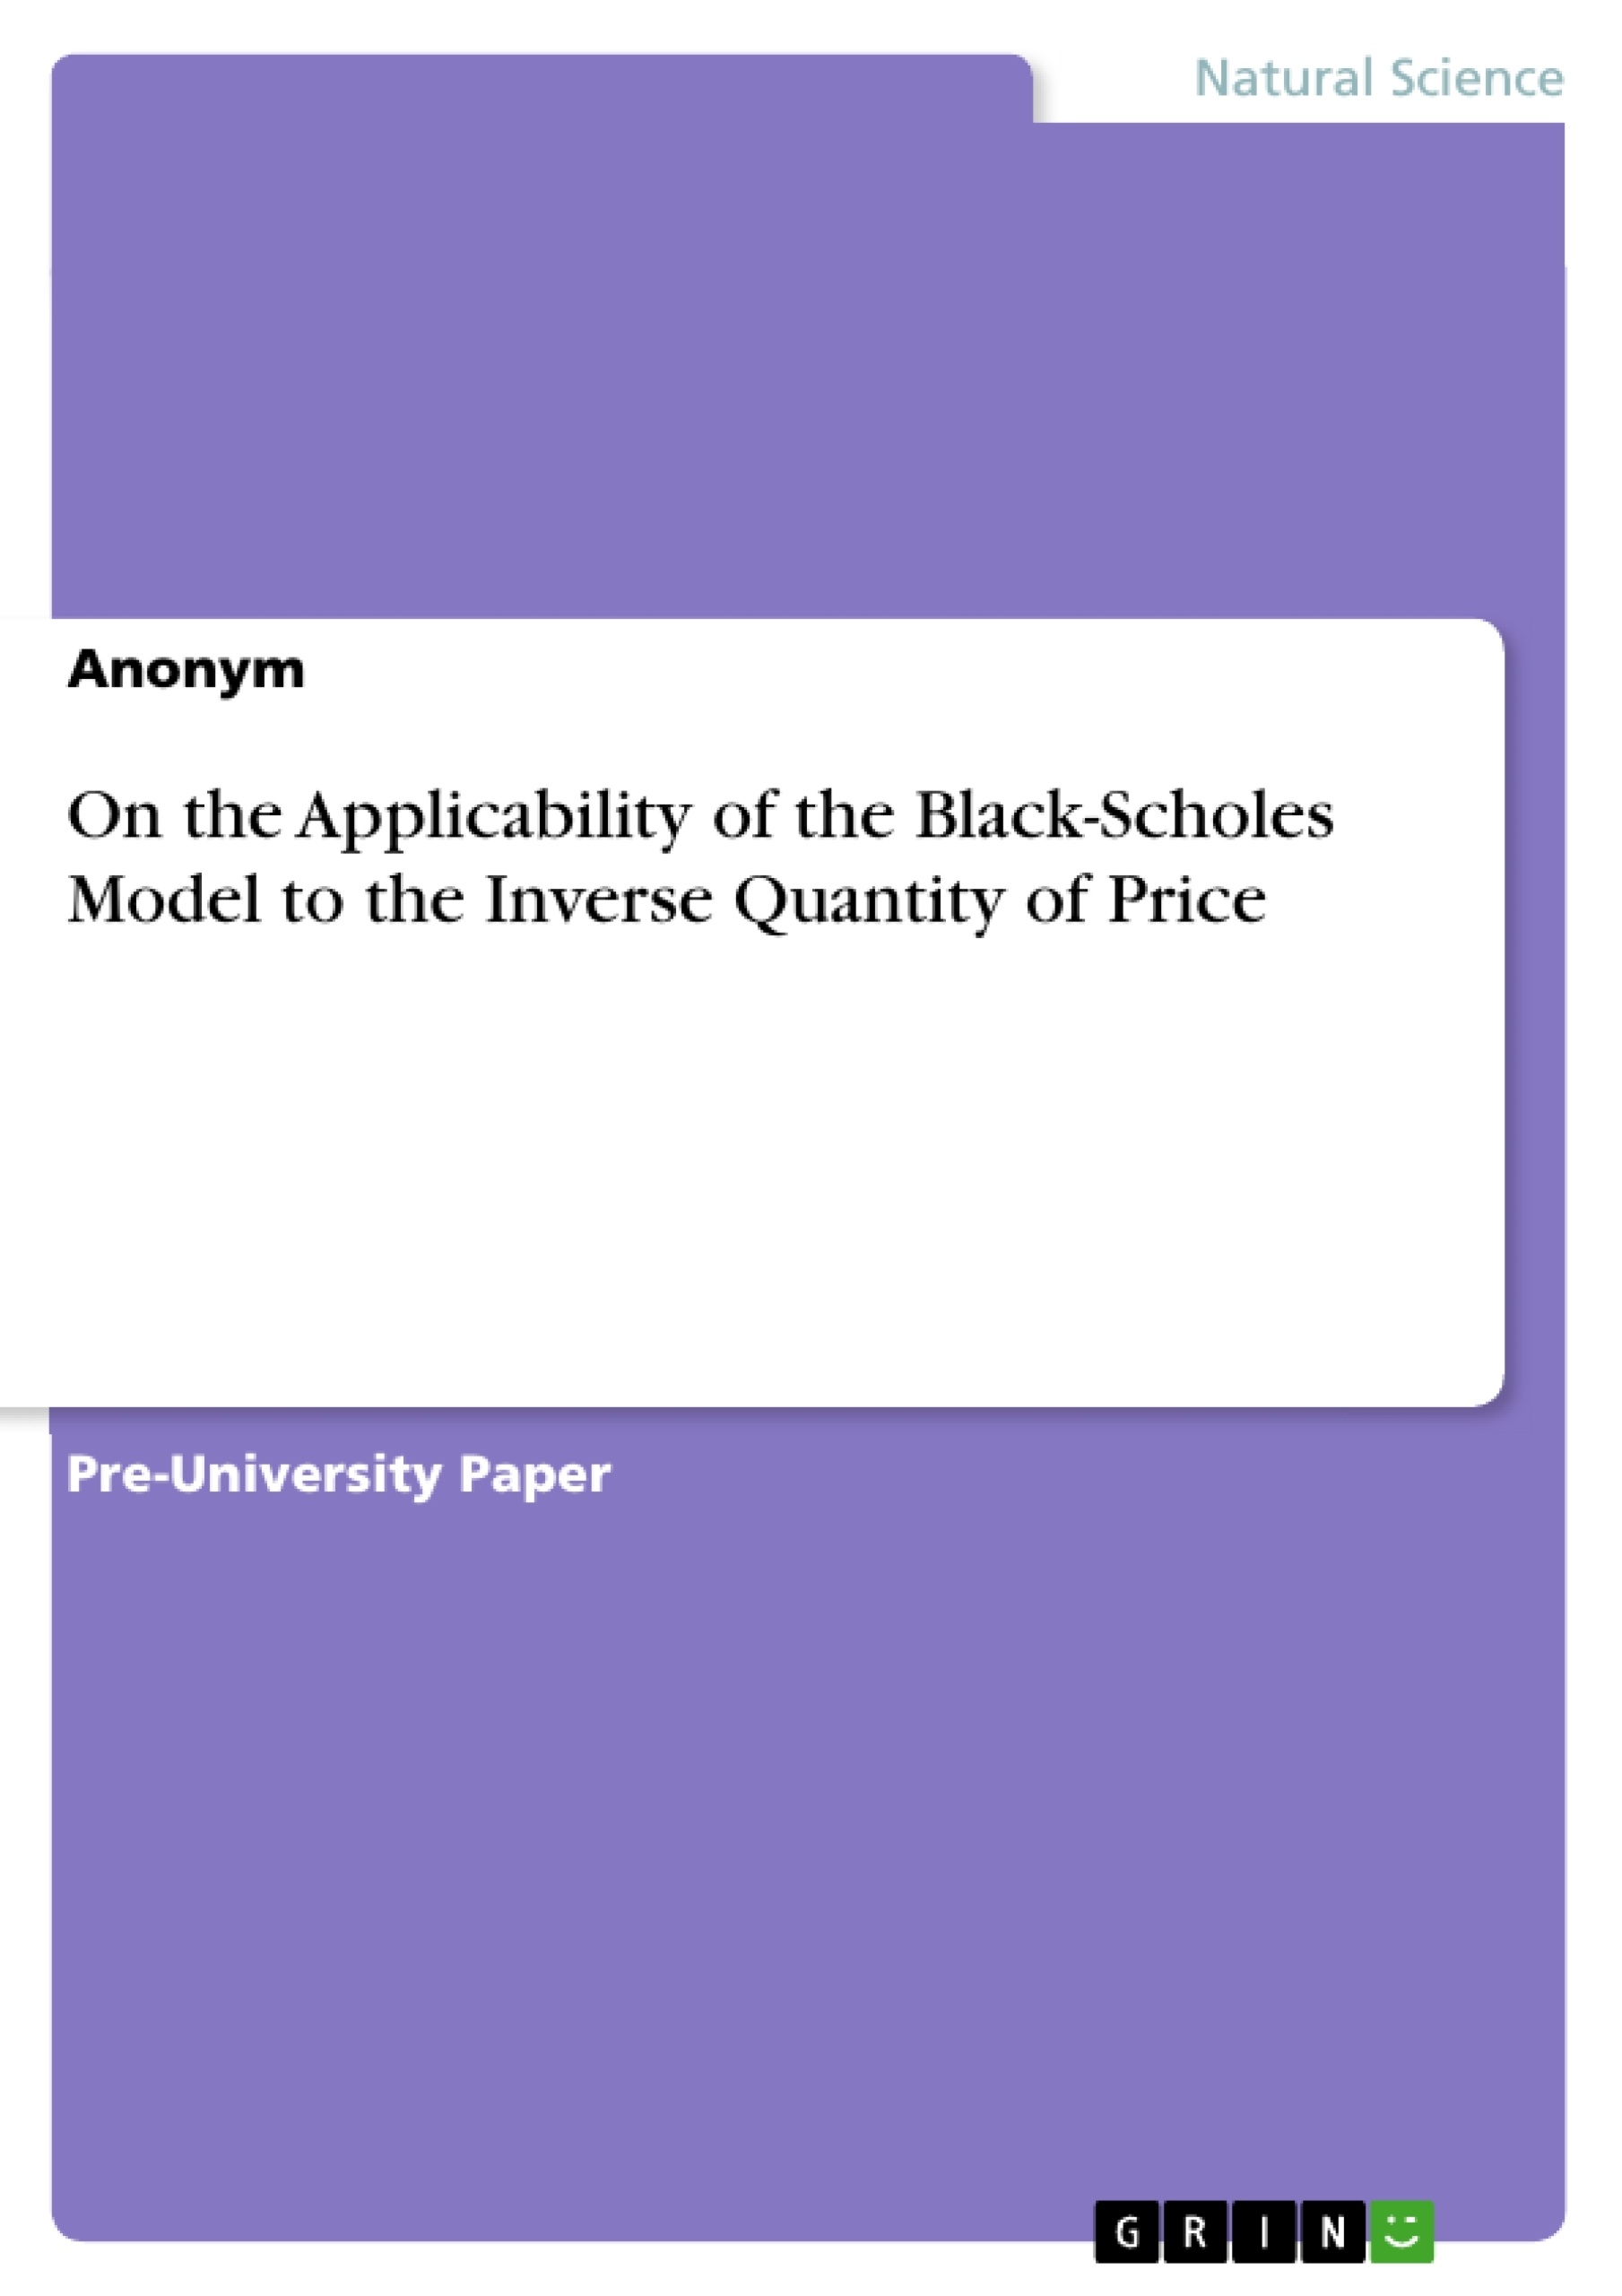 Título: On the Applicability of the Black-Scholes Model to the Inverse Quantity of Price